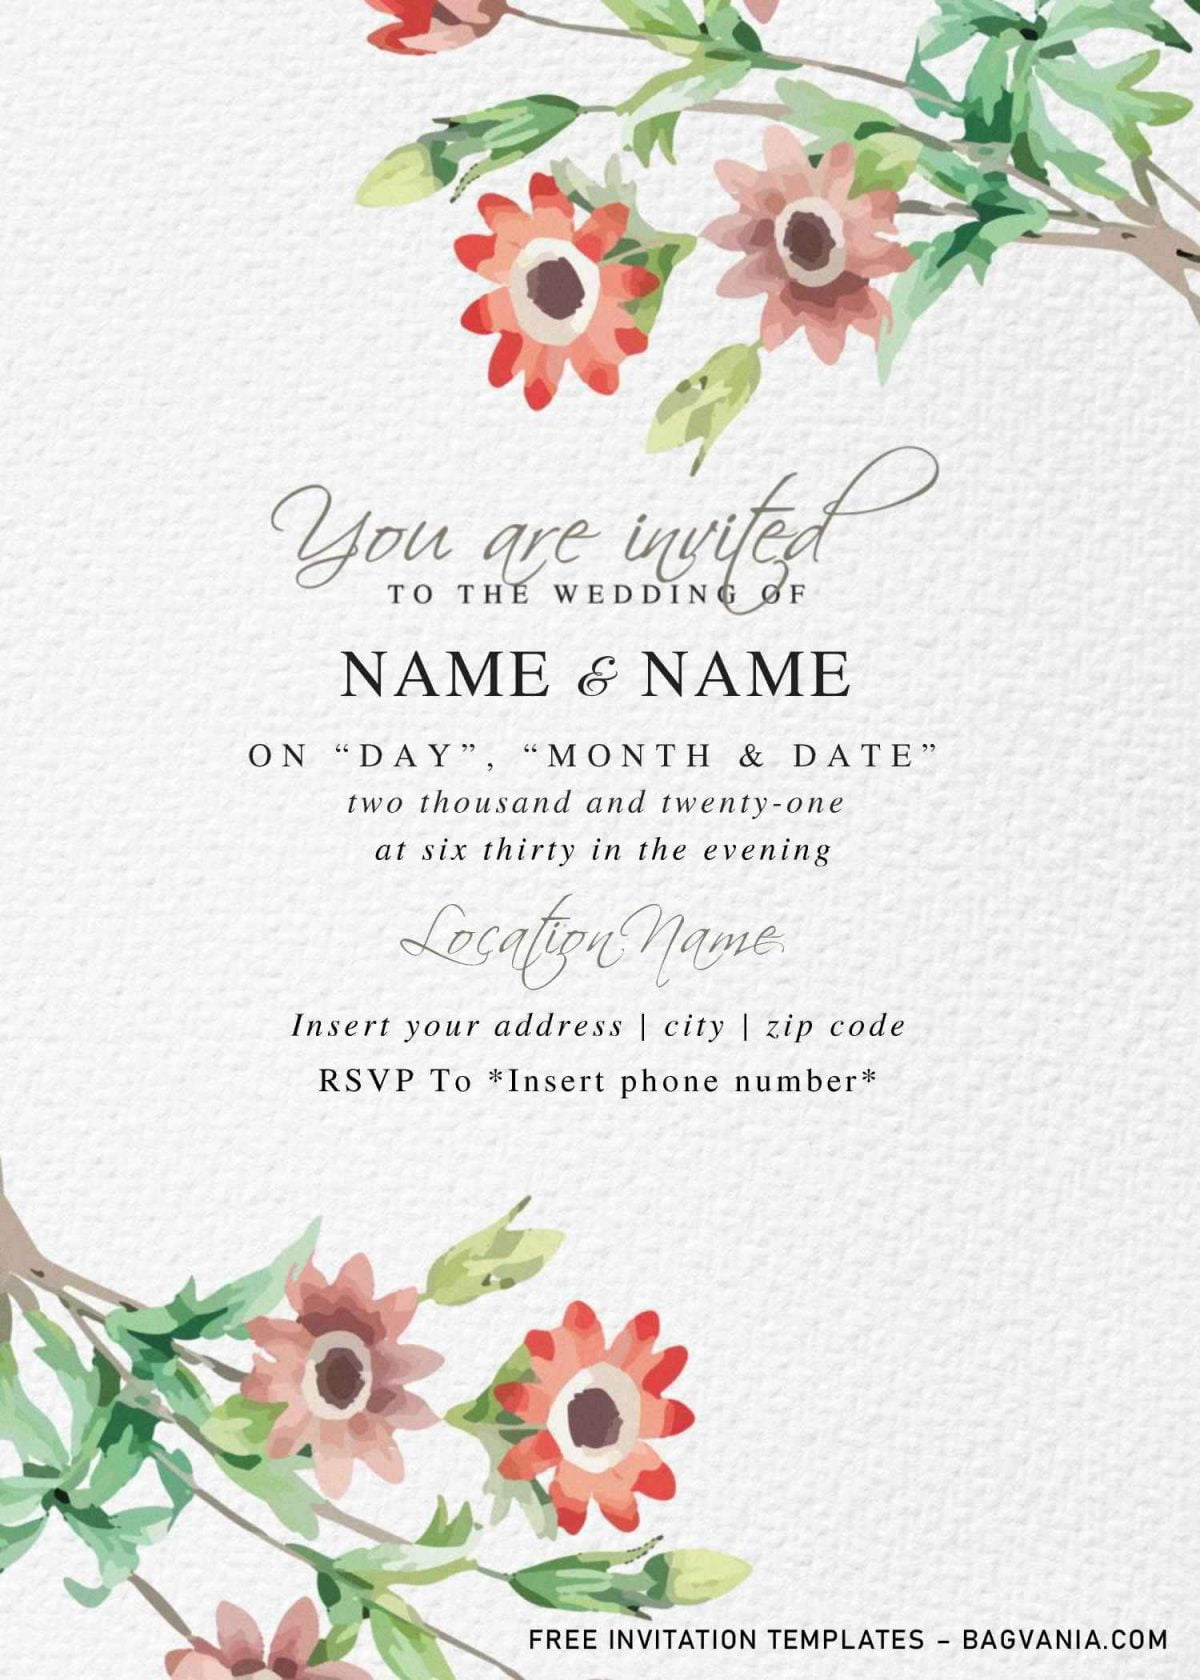 Free Botanical Floral Wedding Invitation Templates For Word and has canvas background